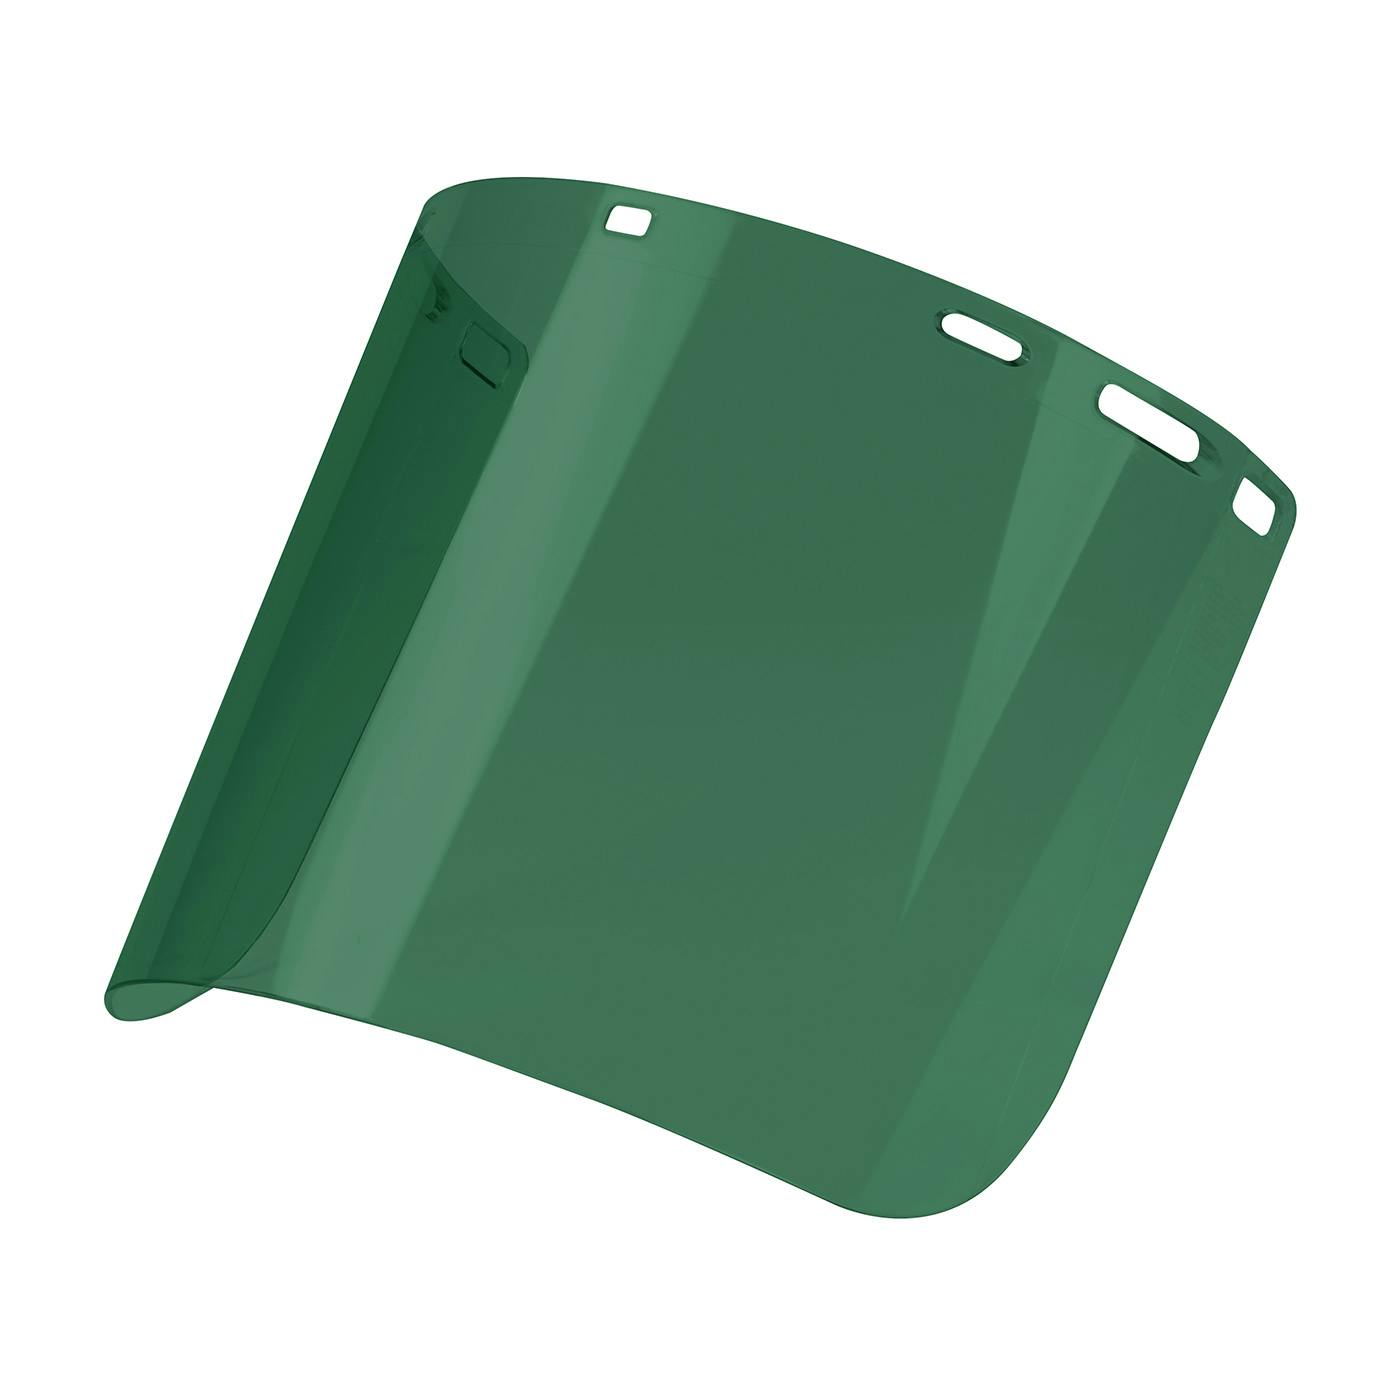 Uncoated Polycarbonate Safety Visor - Dark Green Tint, Green (251-01-7312) - OS_0